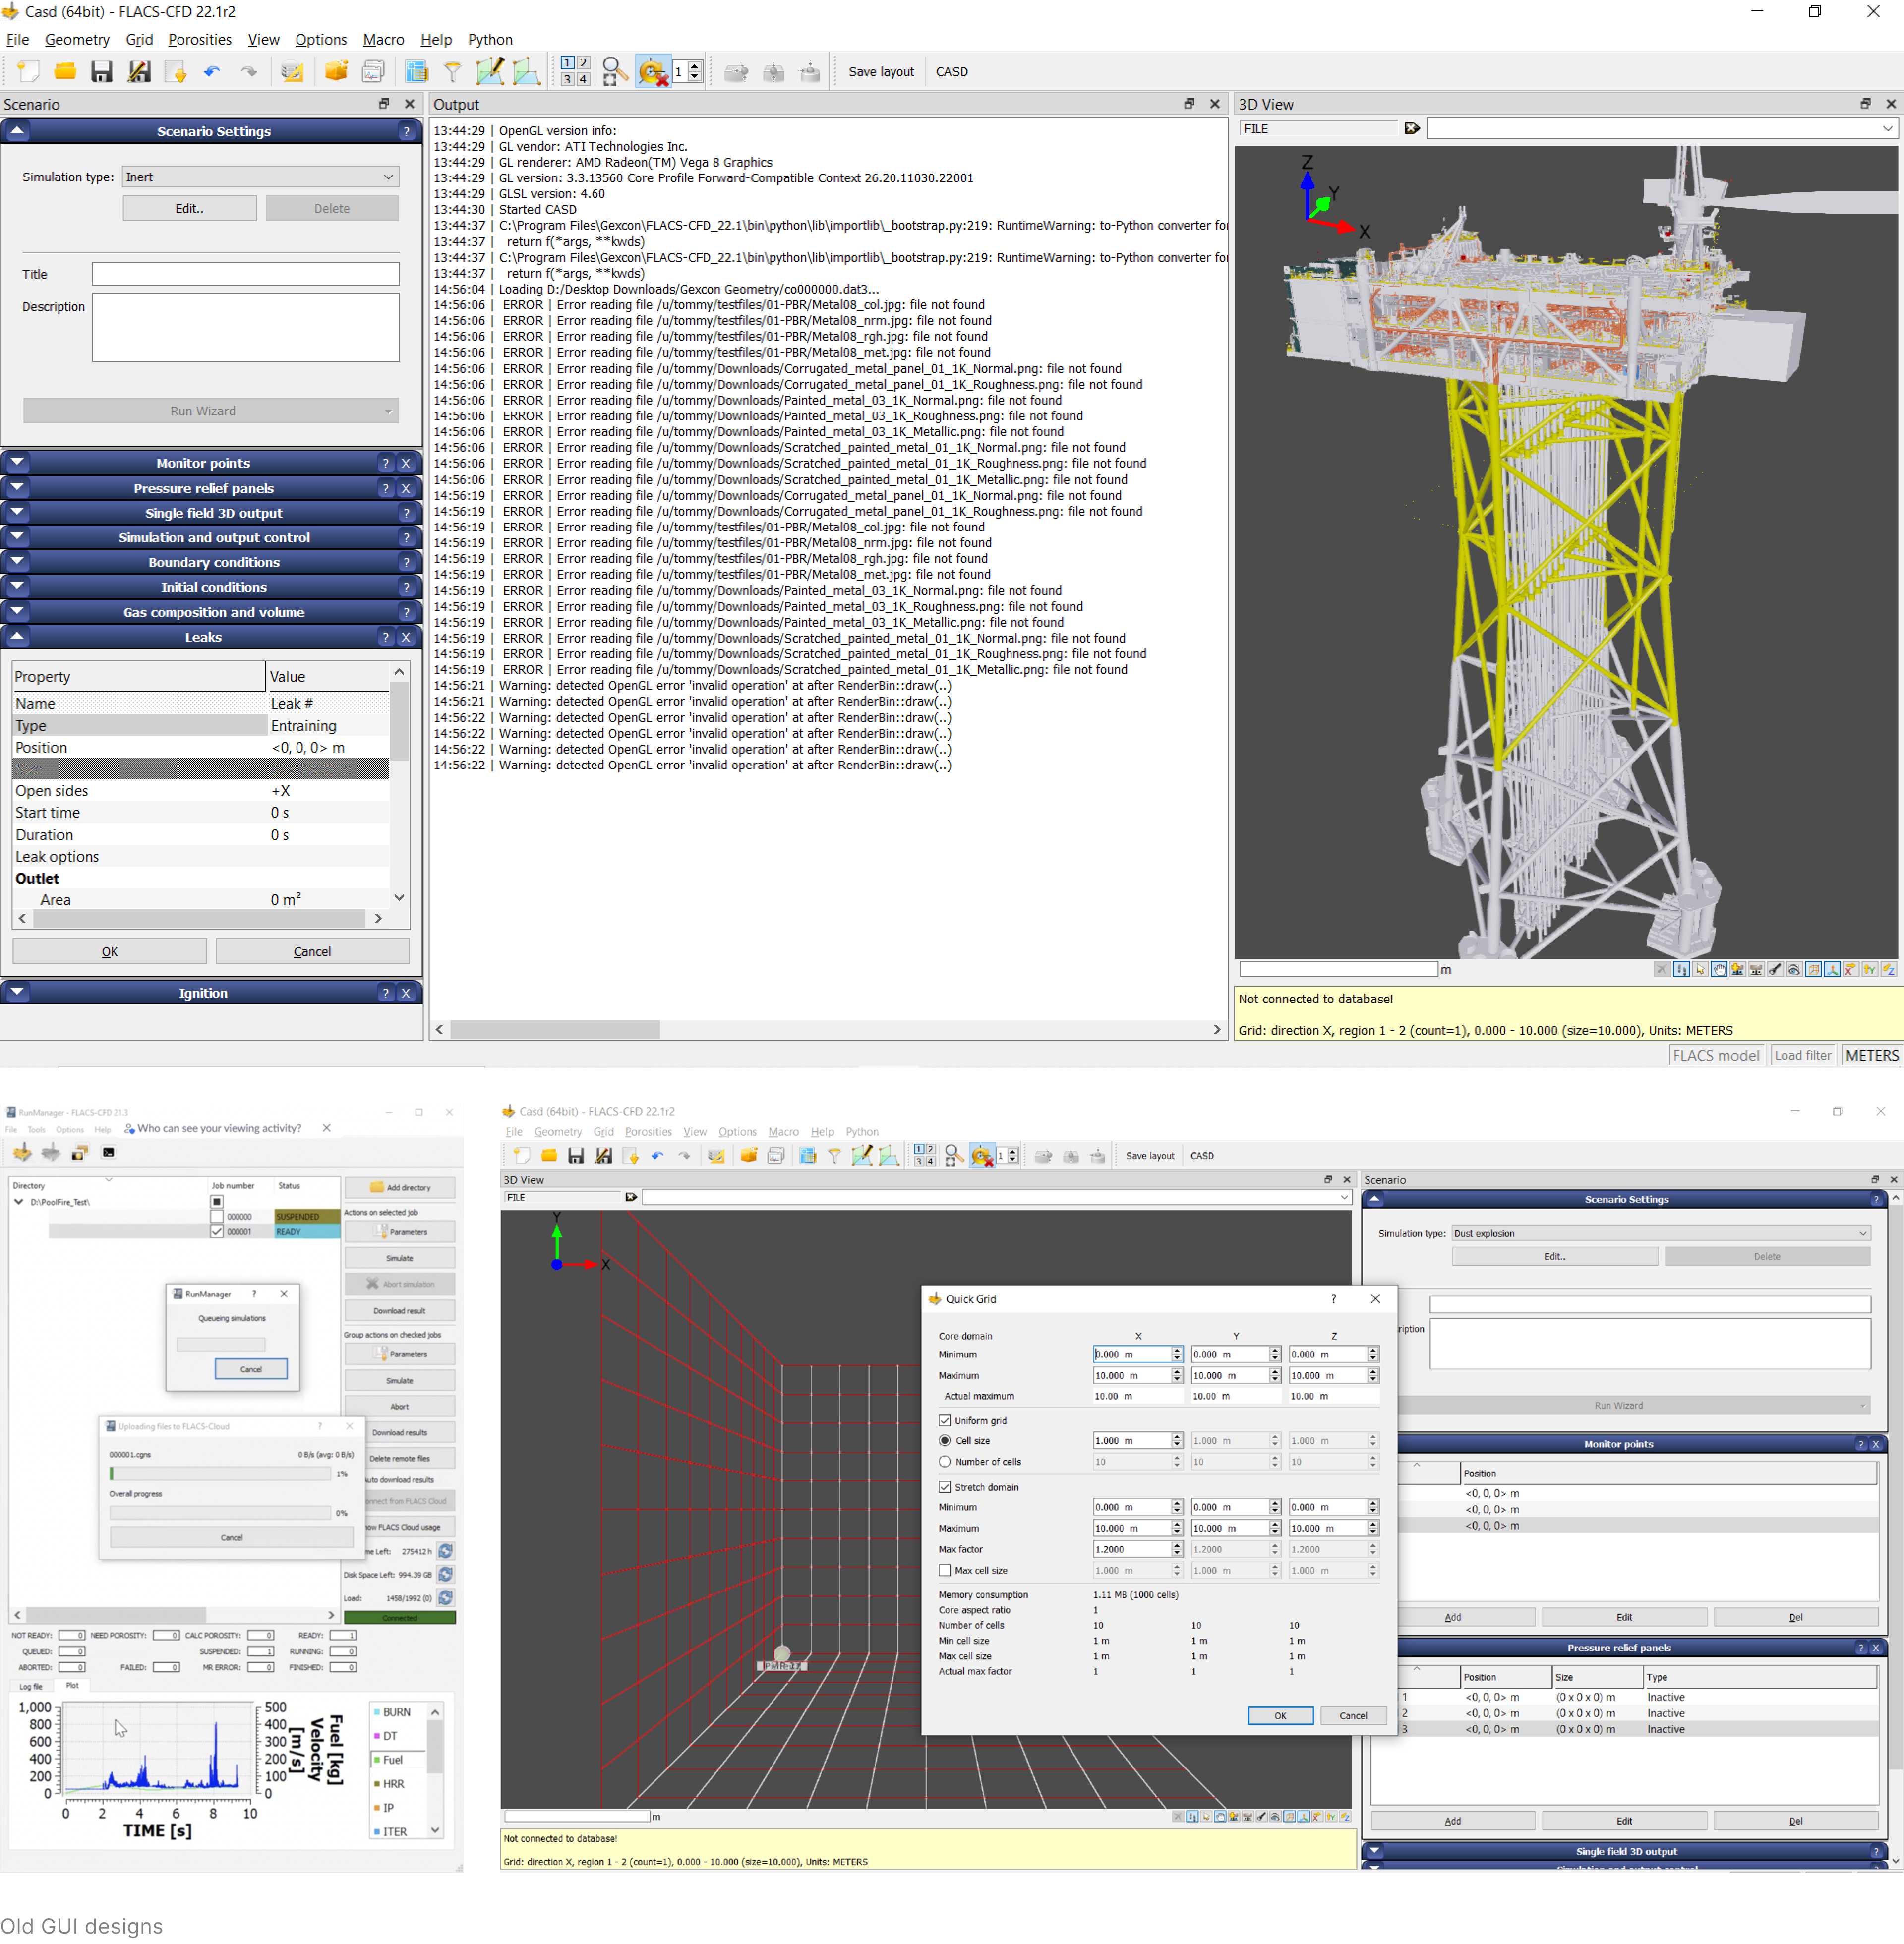 Screenshots from an old user interface of CFD simulation software.